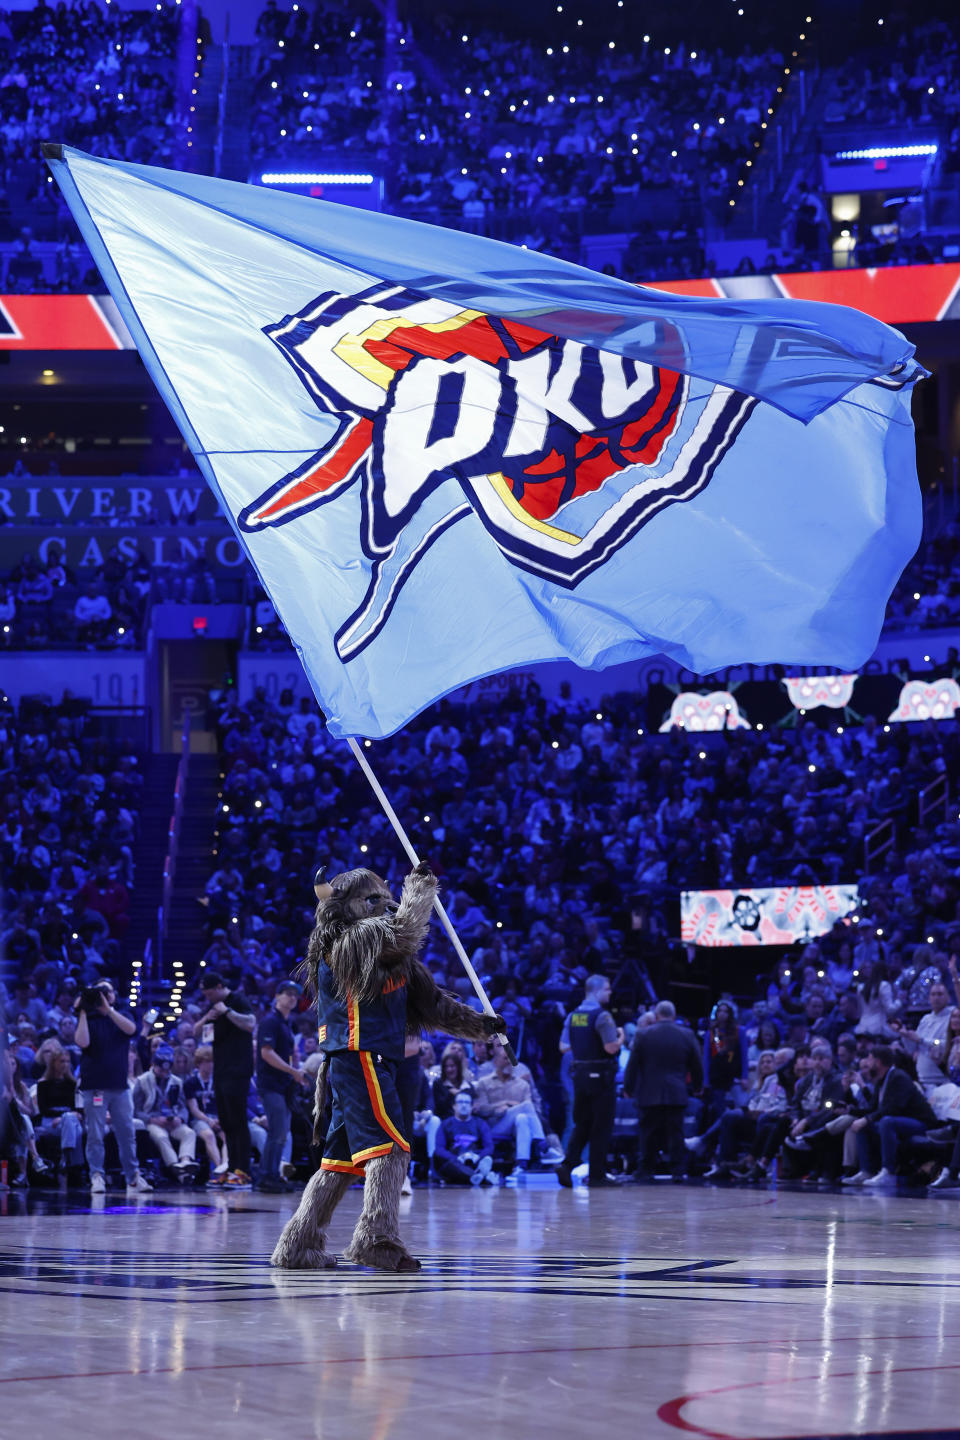 Dec 31, 2023; Oklahoma City, Oklahoma, USA; Oklahoma City Thunder Mascot Rumble the Bison waves a giant flag during a time out against the Brooklyn Nets in the second half at Paycom Center. Mandatory Credit: Alonzo Adams-USA TODAY Sports